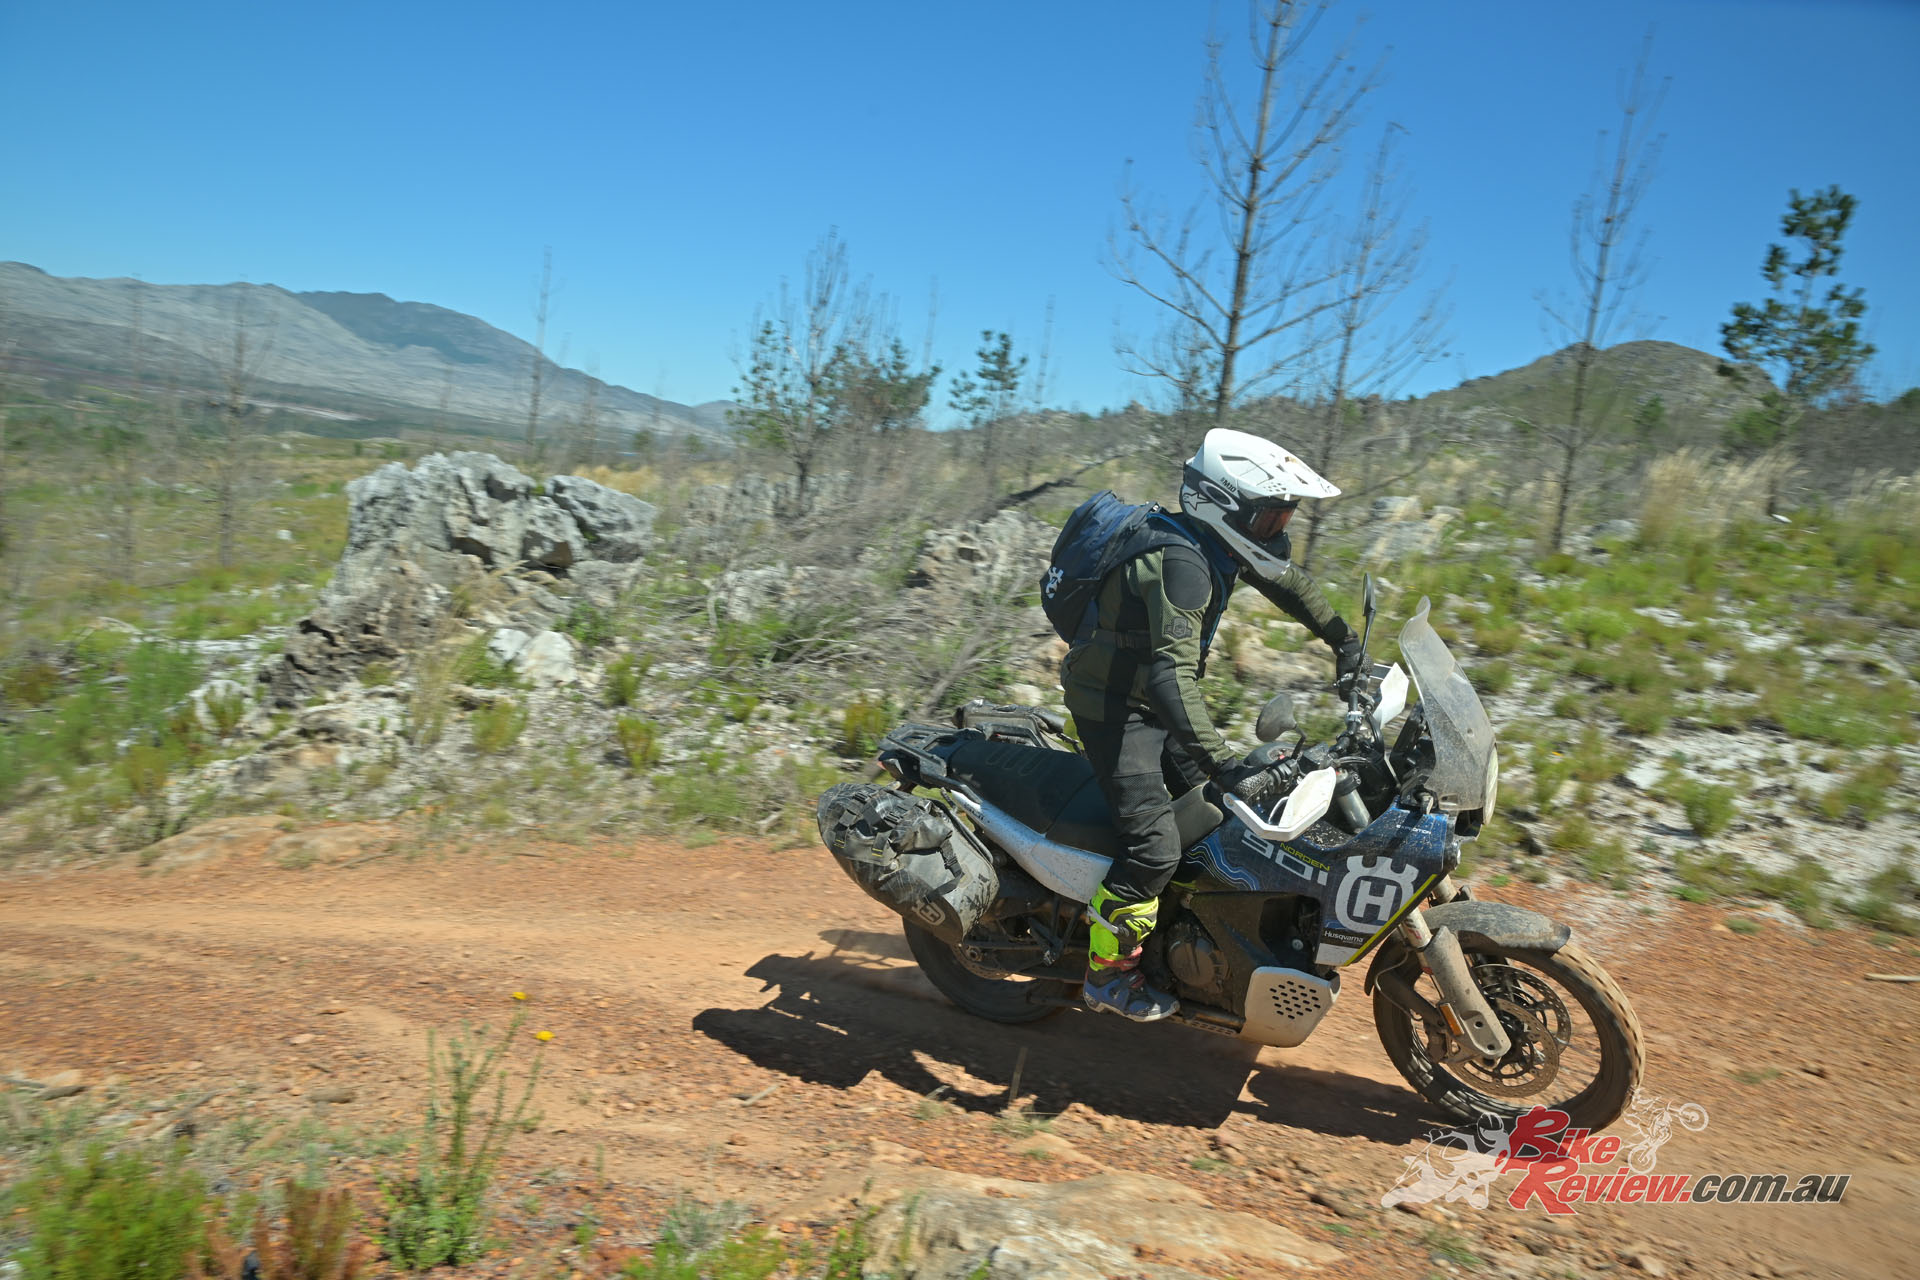 "It doesn’t feel heavy on the move and rolls over rough terrain, but it does give the suspension a hard workout, especially with a bulkier rider and luggage fully loaded."